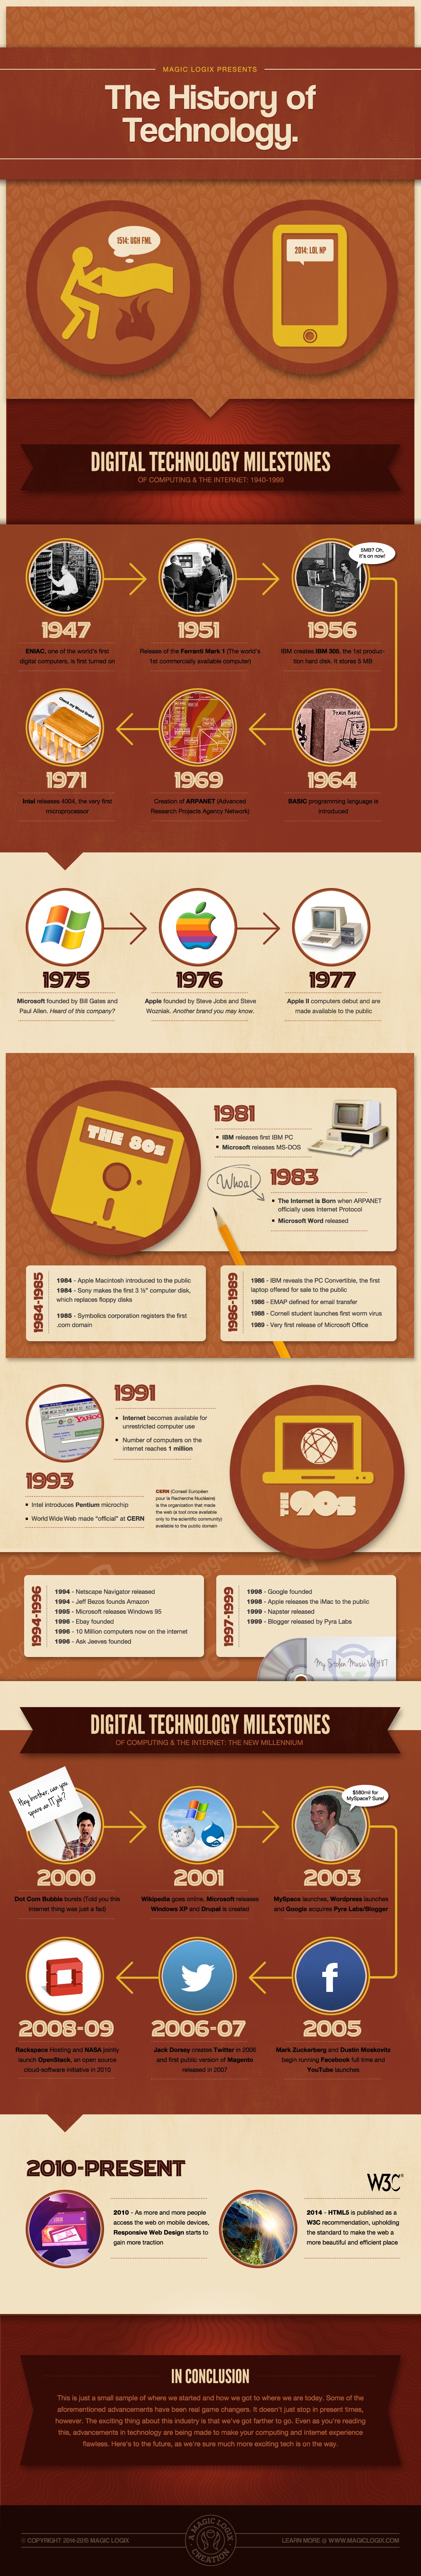 A History of Digital Technology Infographic